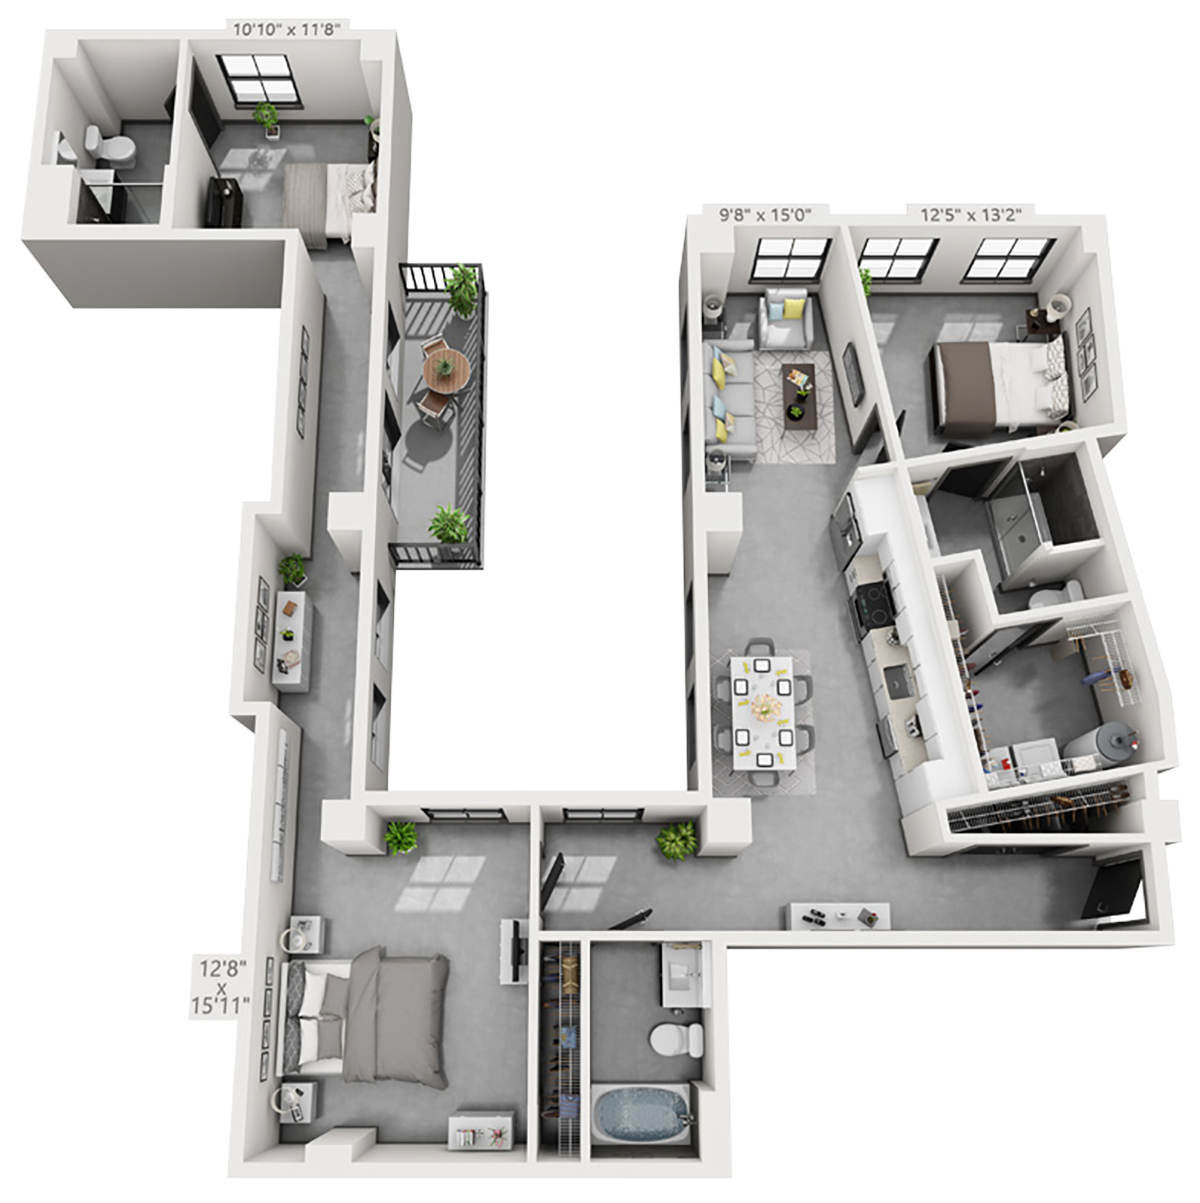 B14 plan is 3 bed, 3 bath and 1,568 square feet